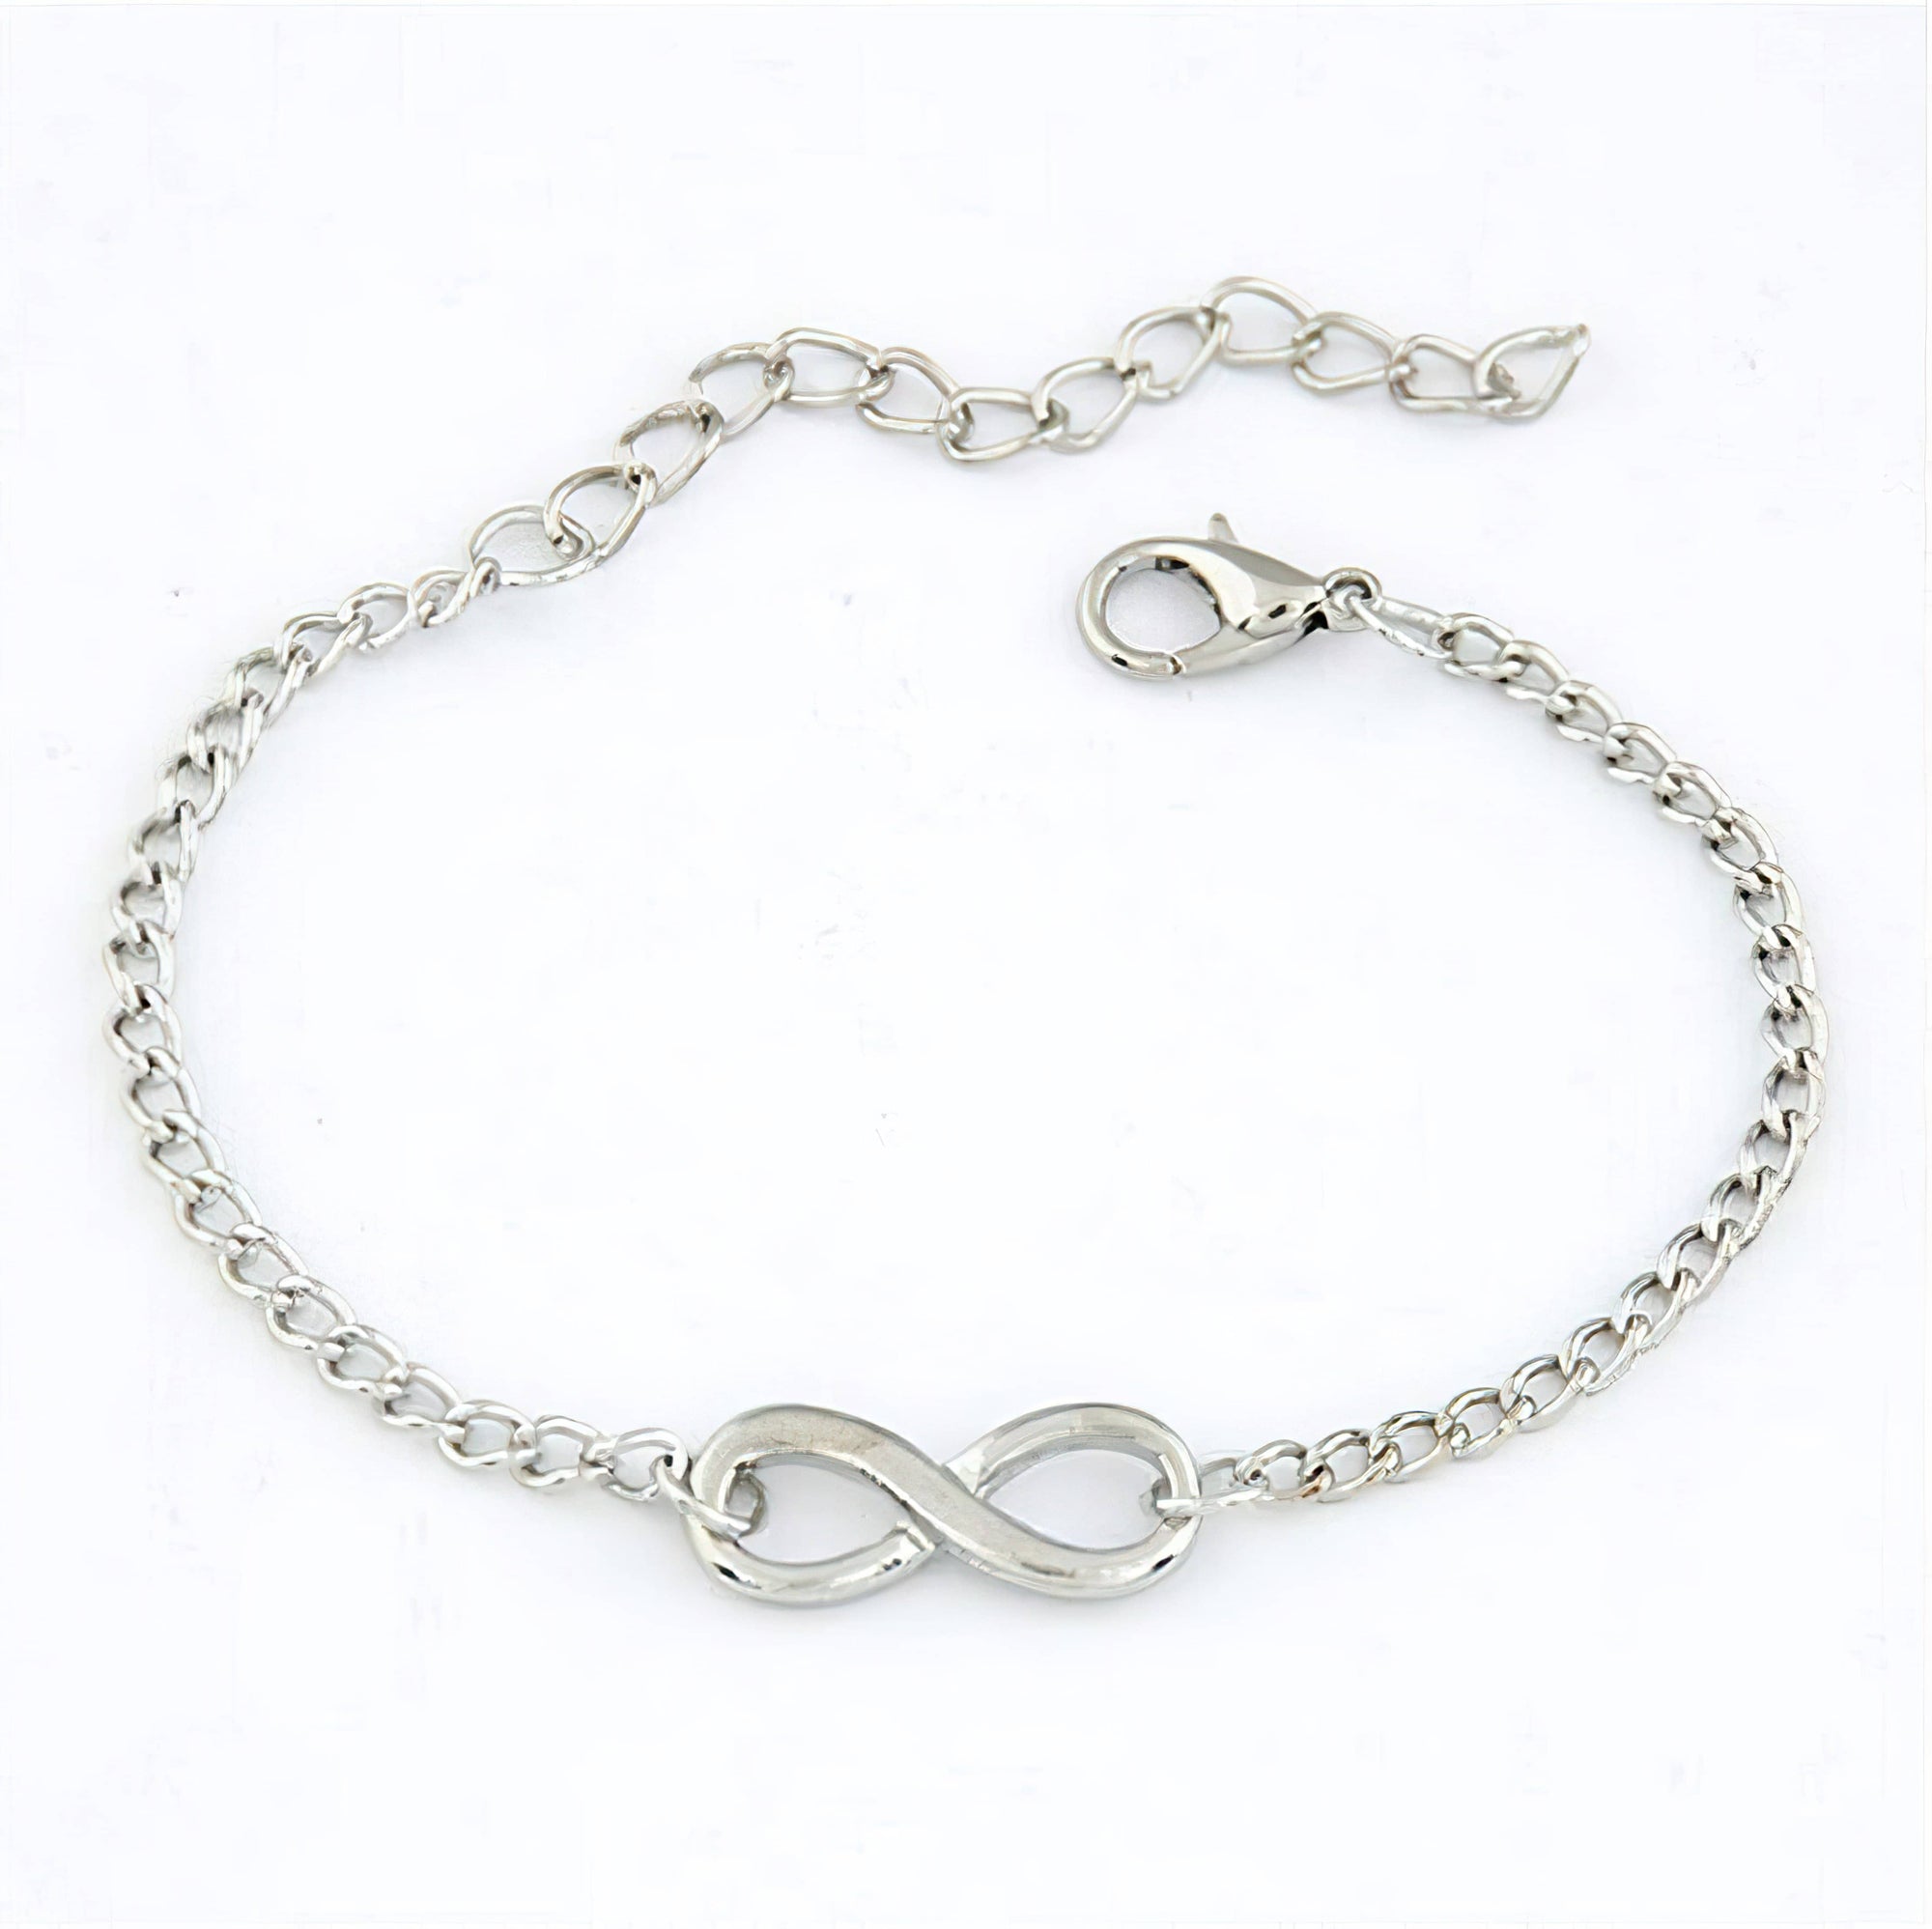 Infinity Charm Bracelet in Gold or Silver Color Free Shipping ! (4165679546462)